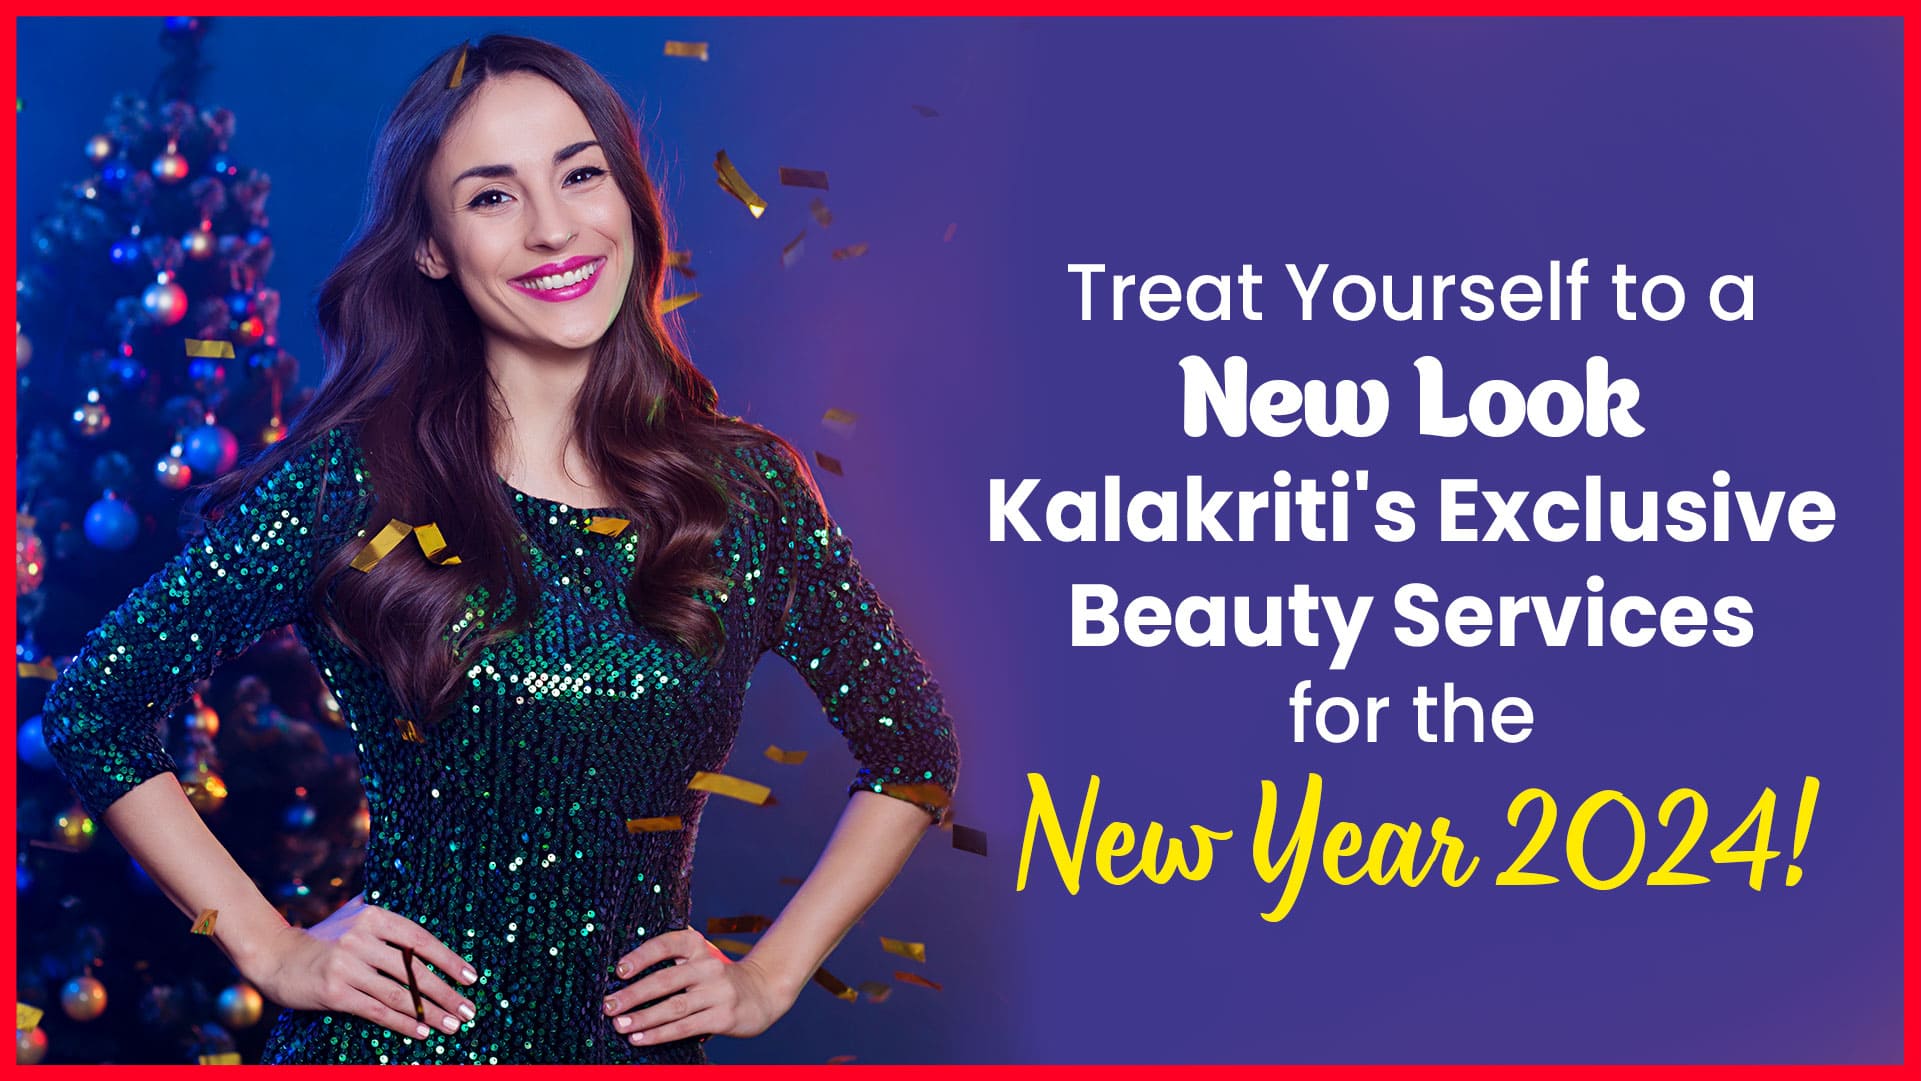 Kalakriti's Exclusive Beauty Services for the New Year 2024!